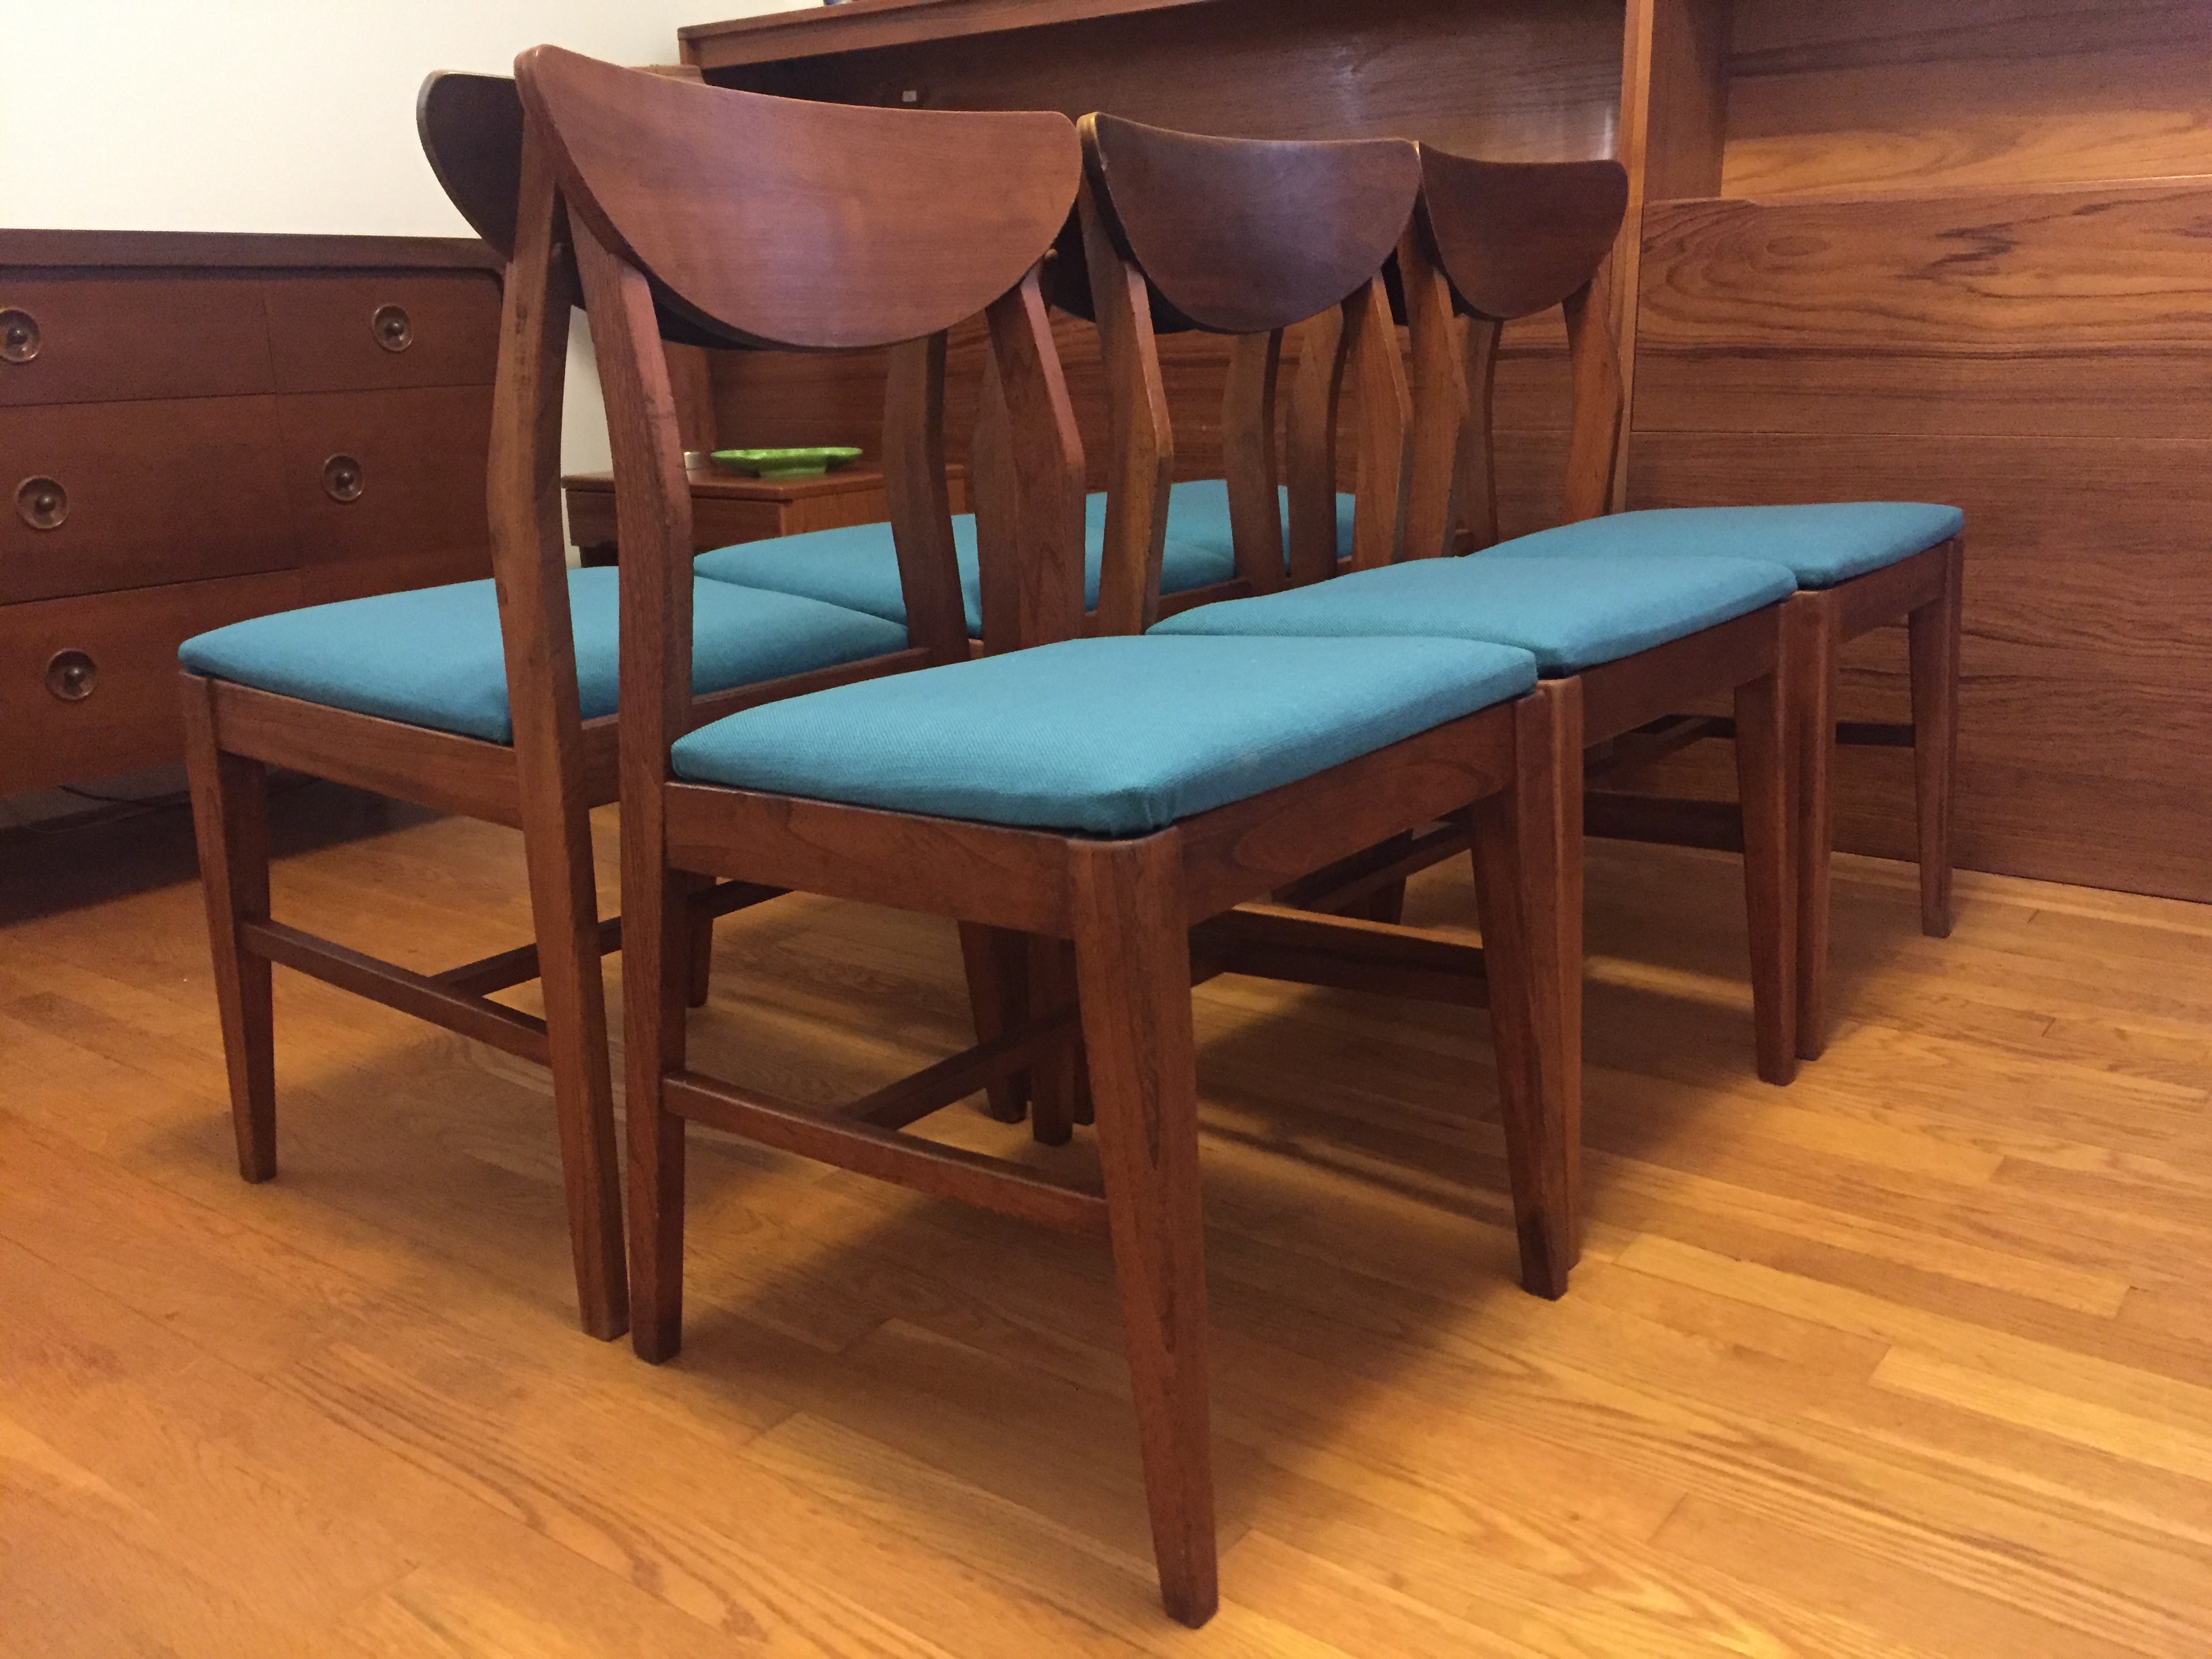 Turquoise Mid-Century Dining Room Chairs